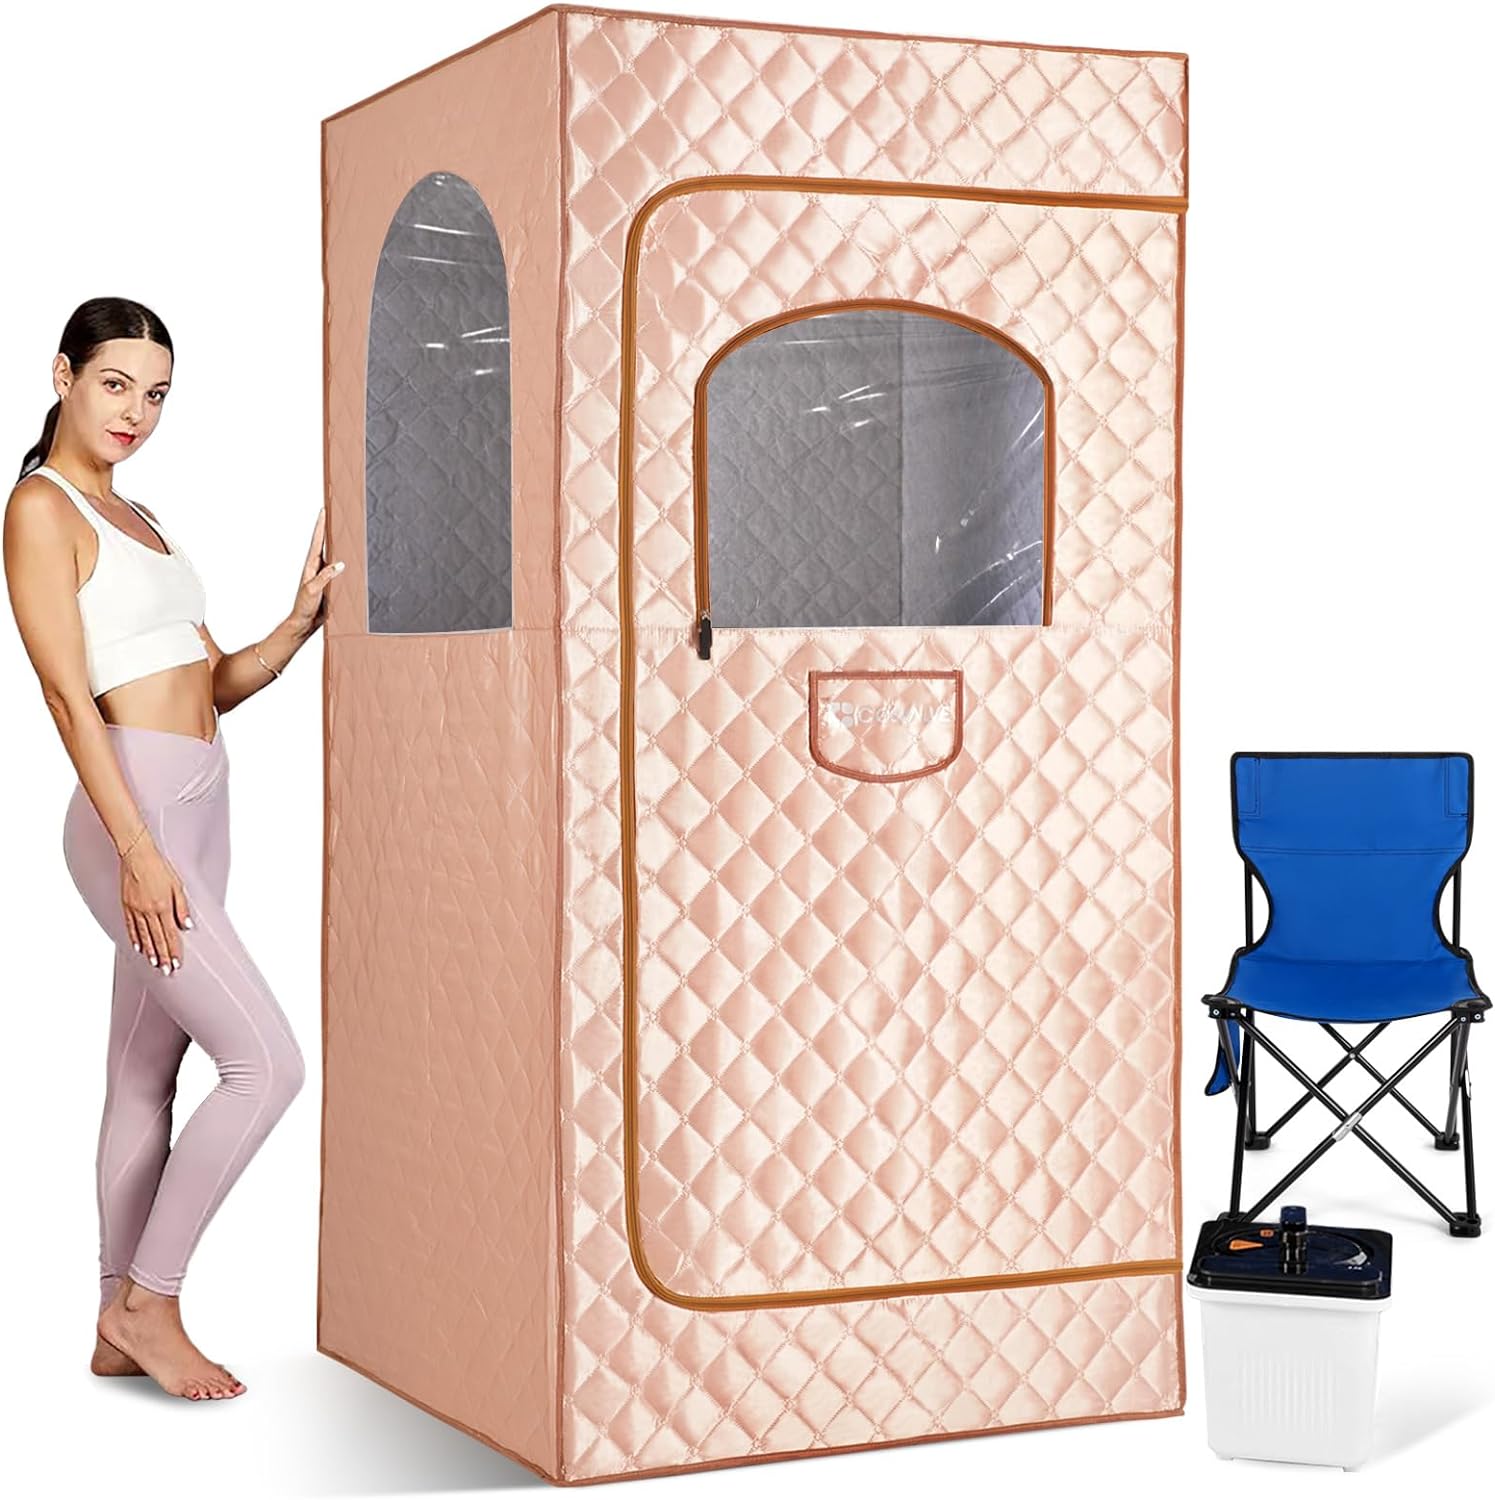 COSVALVE Full Size Portable Steam Sauna Kit, Personal Sauna Tent for Home Spa,4L & 1500W Steam Generator,Remote Control,Timer, Hook,Indoor Steam Room for Relaxation(Super Size 35.45L*35.45W*70.87''H)